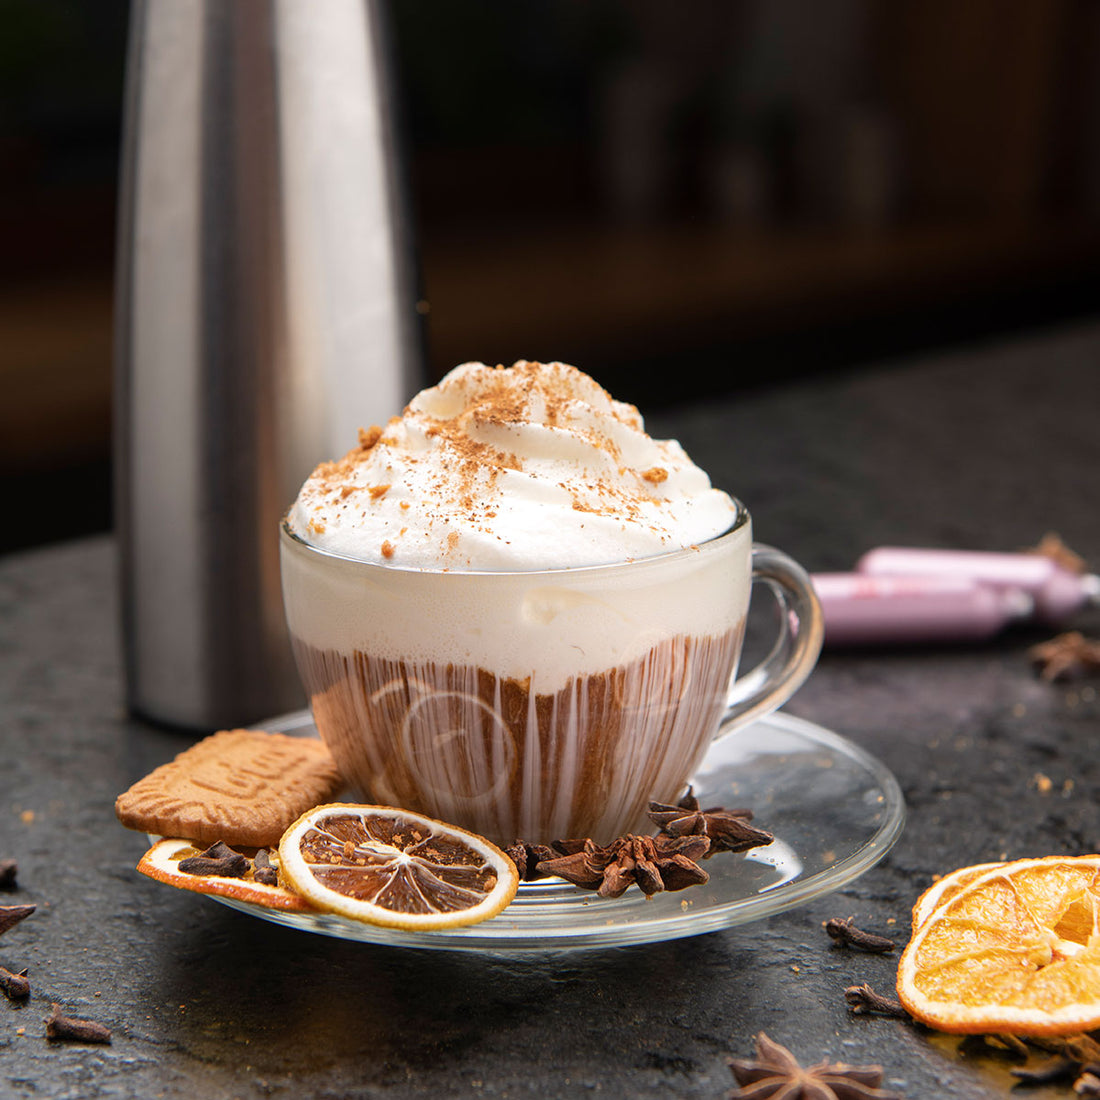 Whip yourself up  a treat with a New York Cheesecake Cappuccino